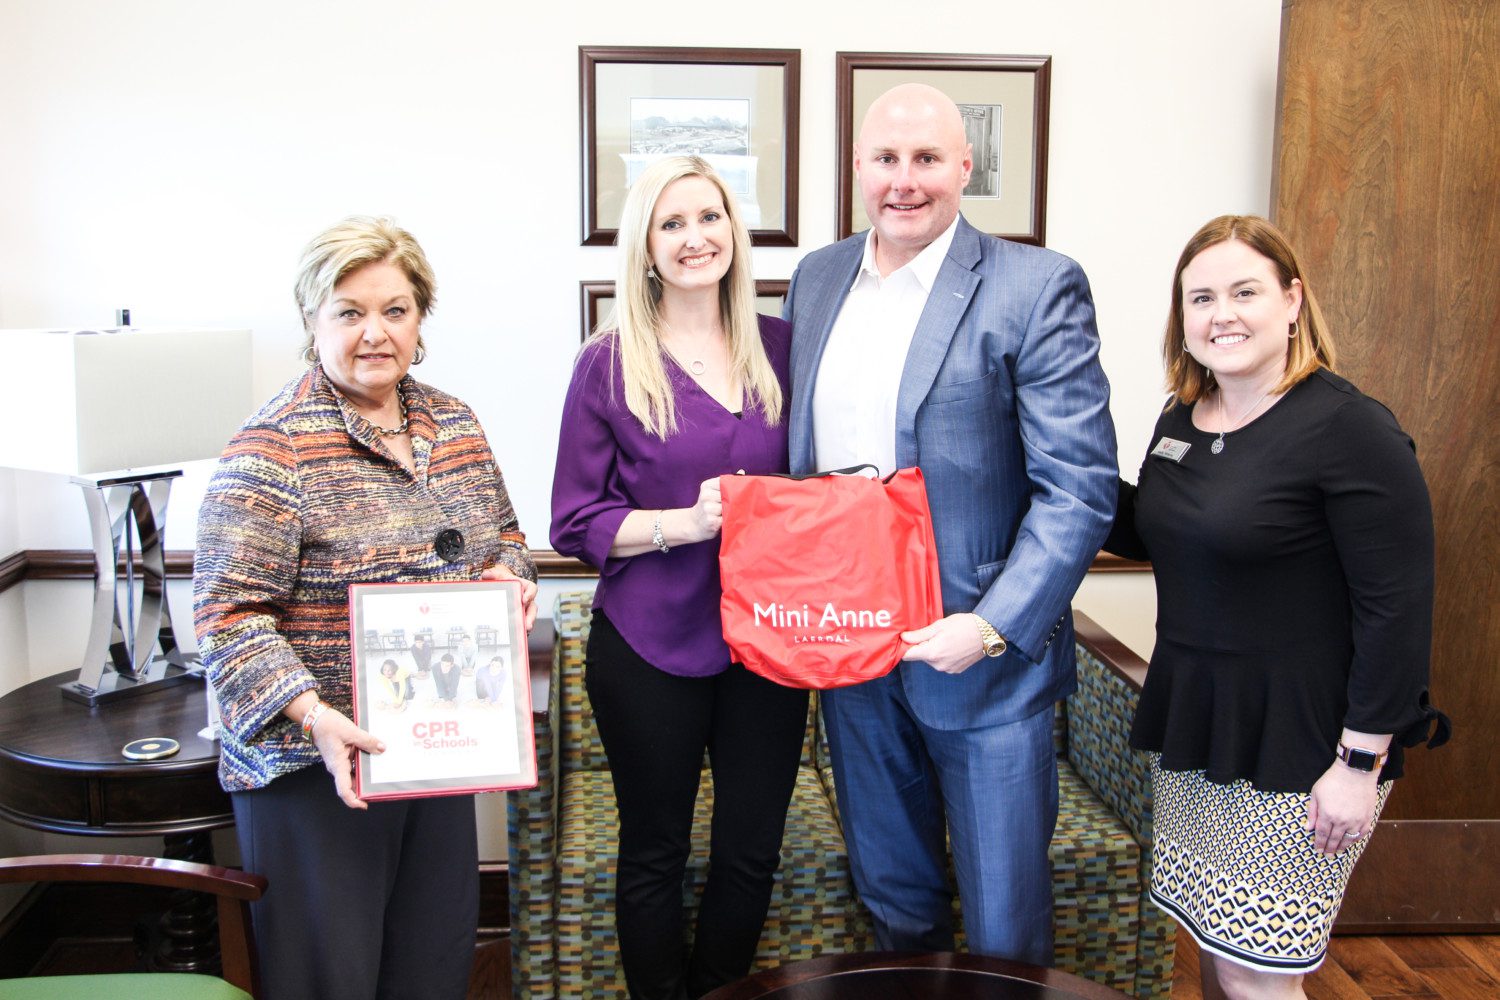 Almeda Jacks meets with donors of CPR training kits provided by the American Heart Association.